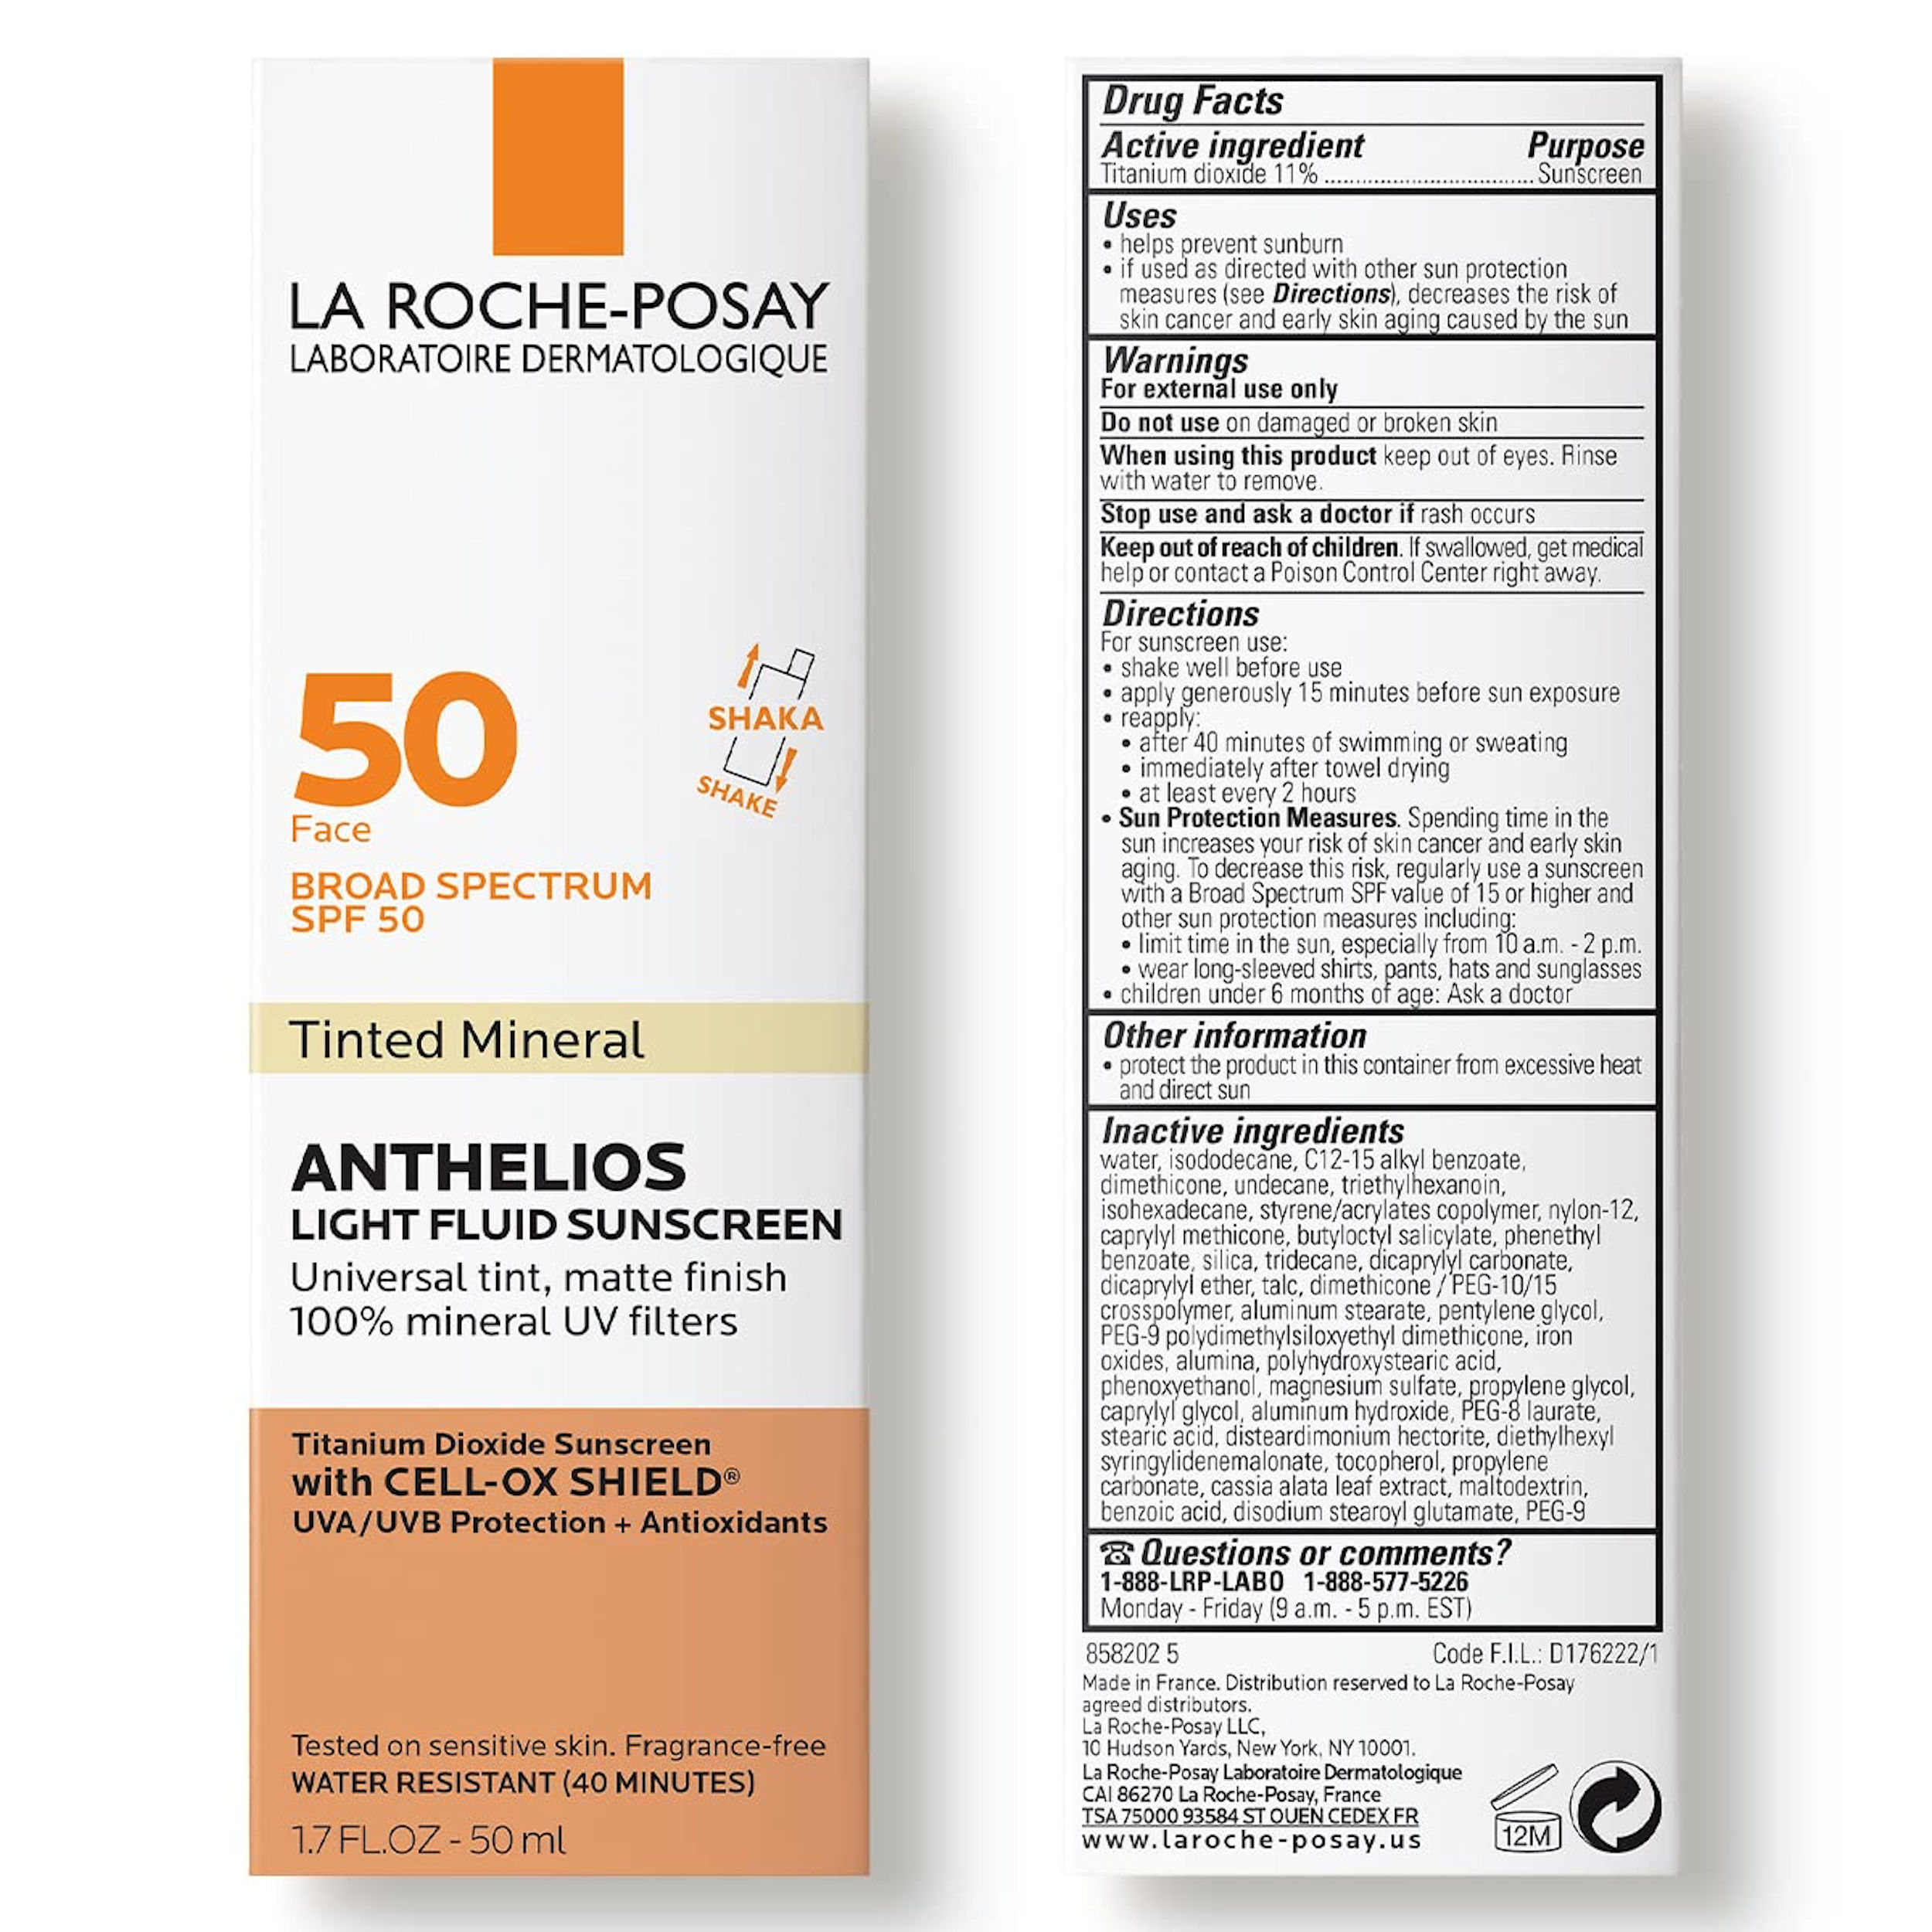 La Roche-Posay Anthelios Mineral Tinted Sunscreen SPF50 for Face 1.7 fl. oz. (50ml) - image 3 of 4